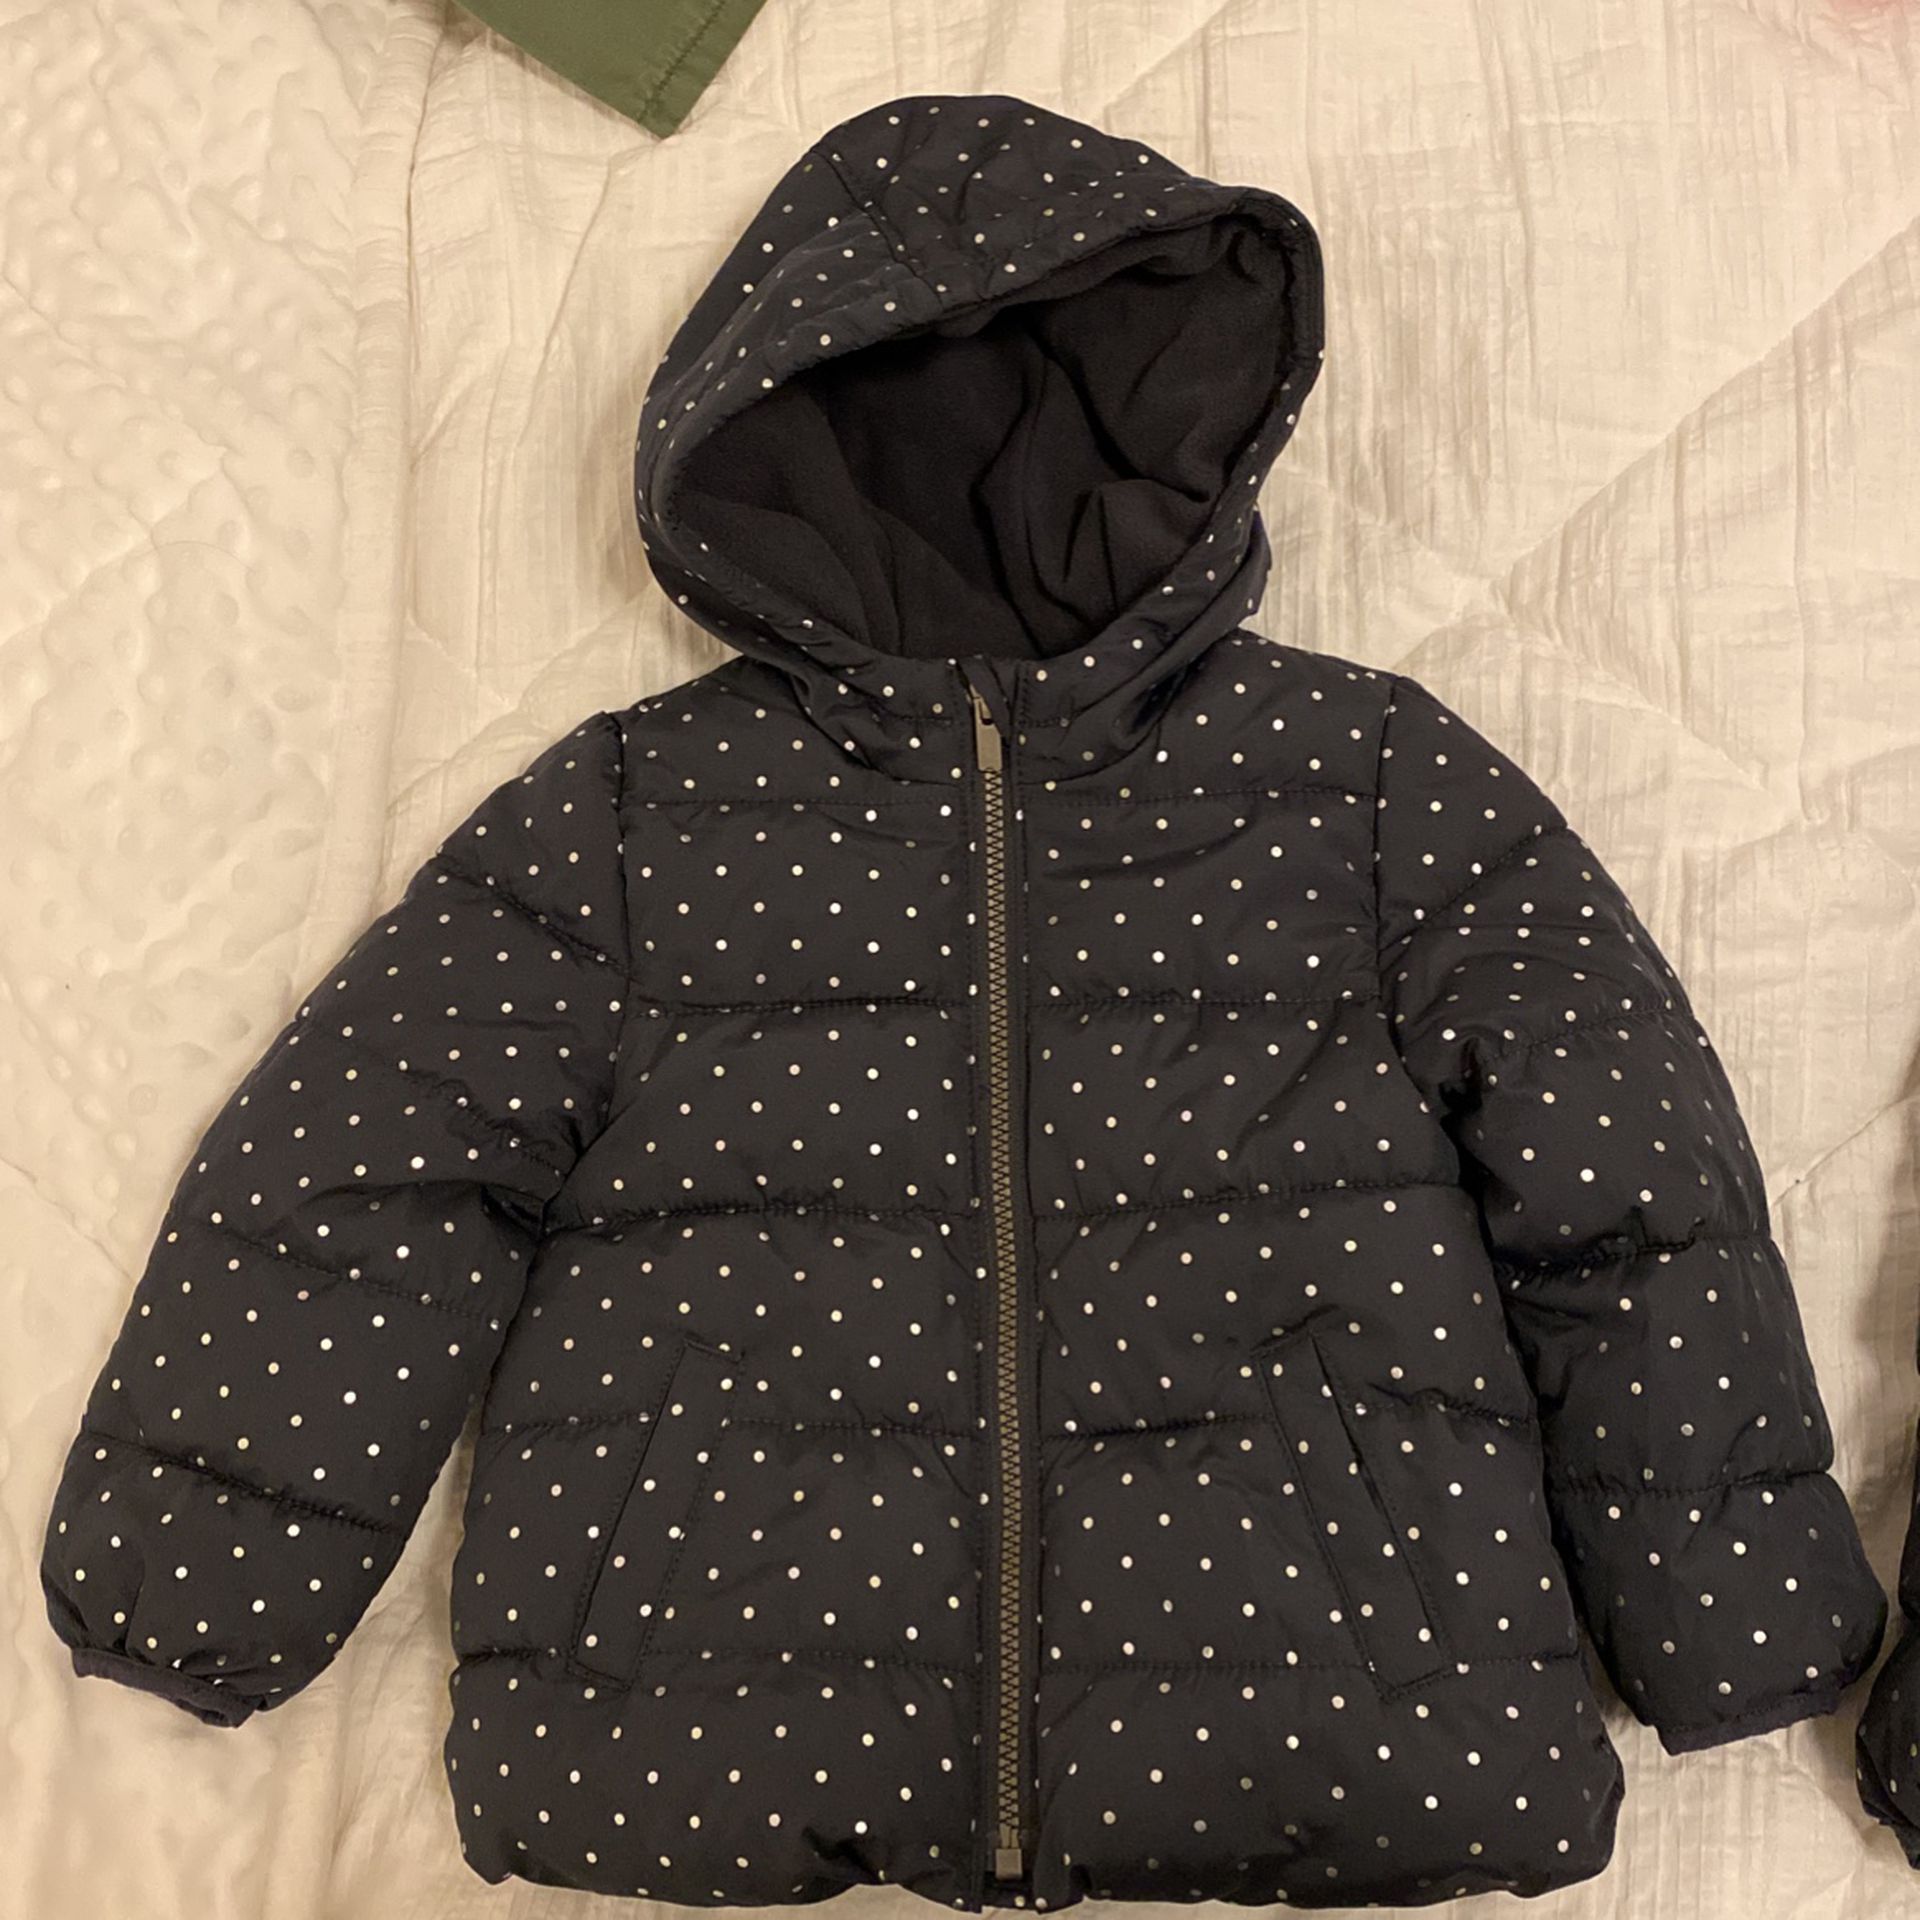 Old Navy Puffer Fleece Lined Like New Barely Worn Size 3t For Sale